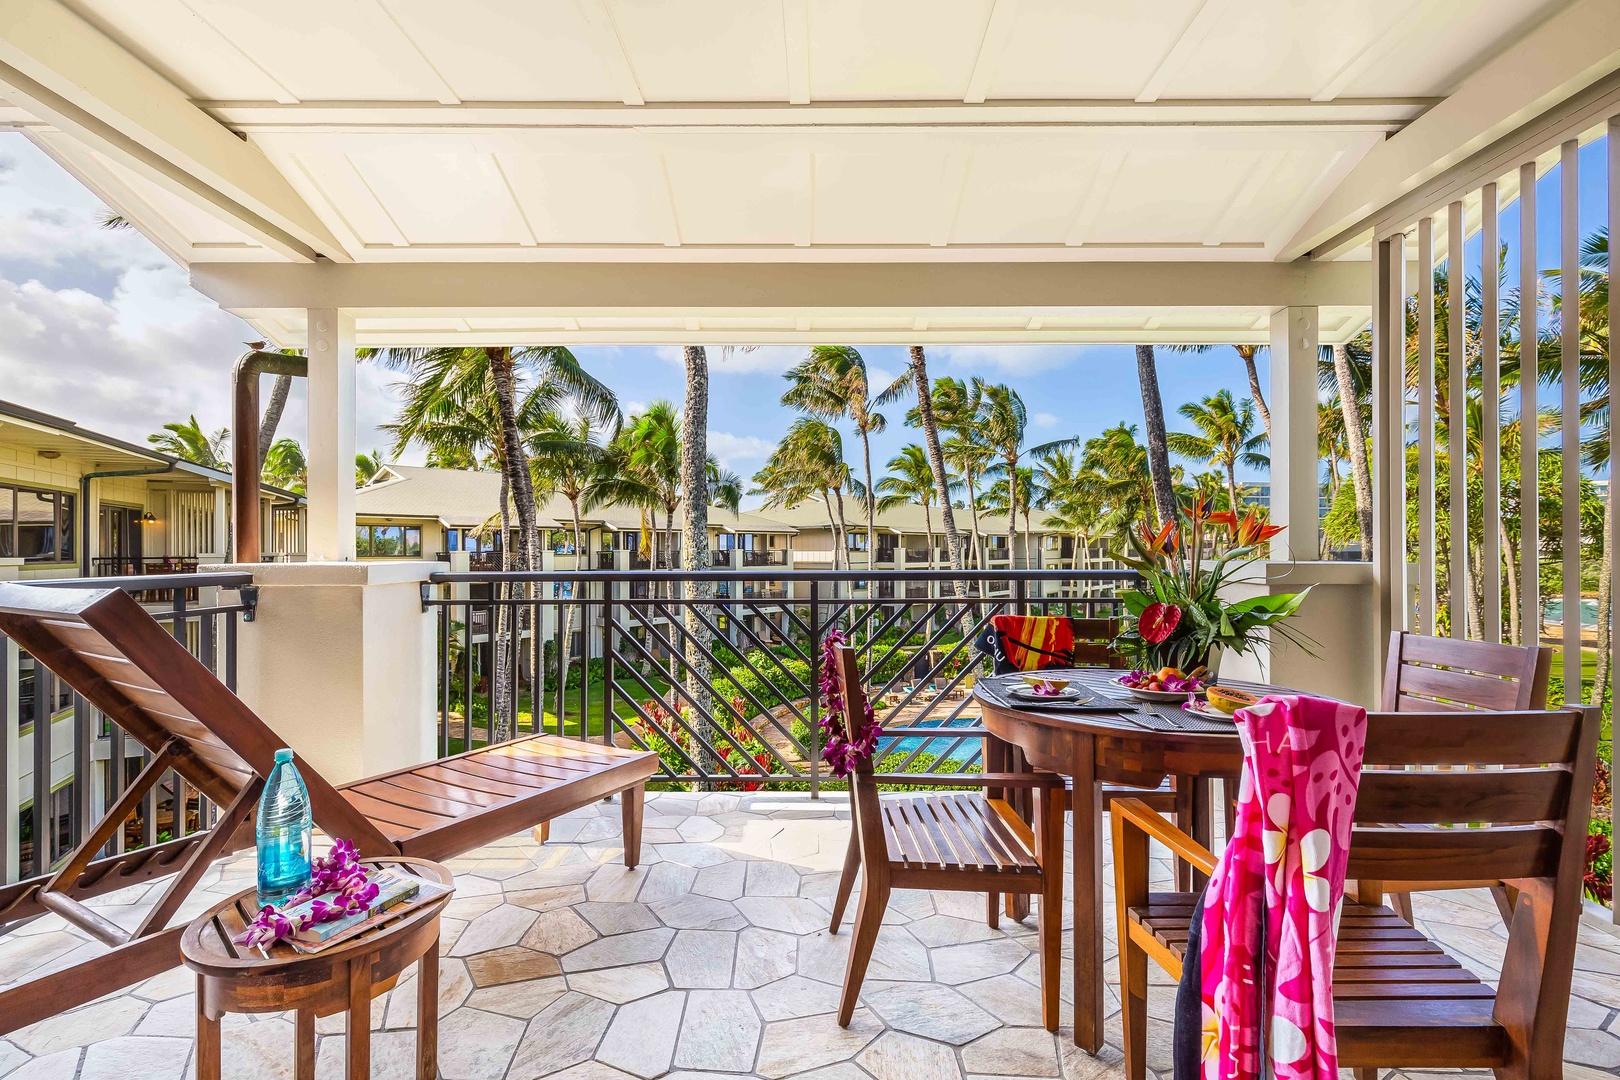 Kahuku Vacation Rentals, Turtle Bay Villas 313 - This 3rd floor condo welcomes you and an additional 7 guests to experience all of the magic that Oahu has to offer with its premiere location on the world-famous North Shore and within the expansive 850-acre community of Turtle Bay.